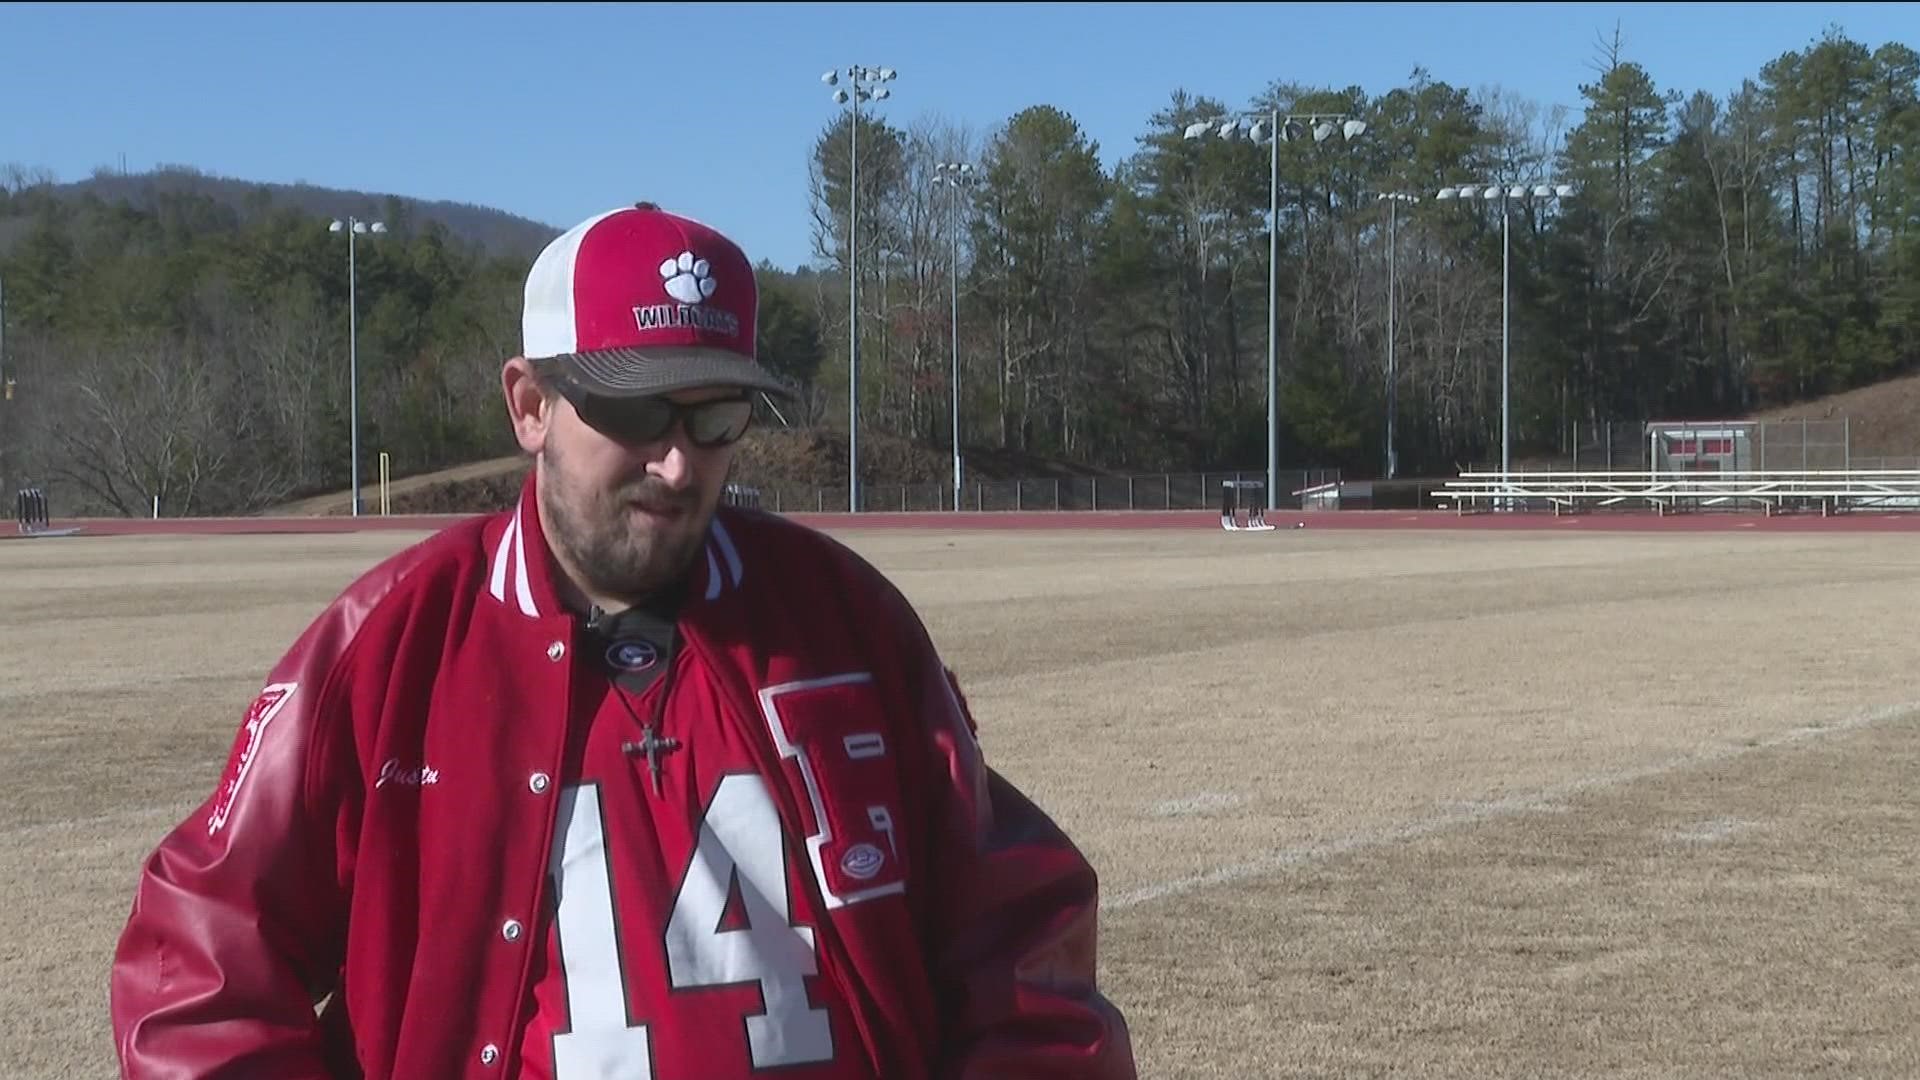 Josh Justus has autism and special needs. Despite being denied for years, he was finally surprised with his own letterman jacket.